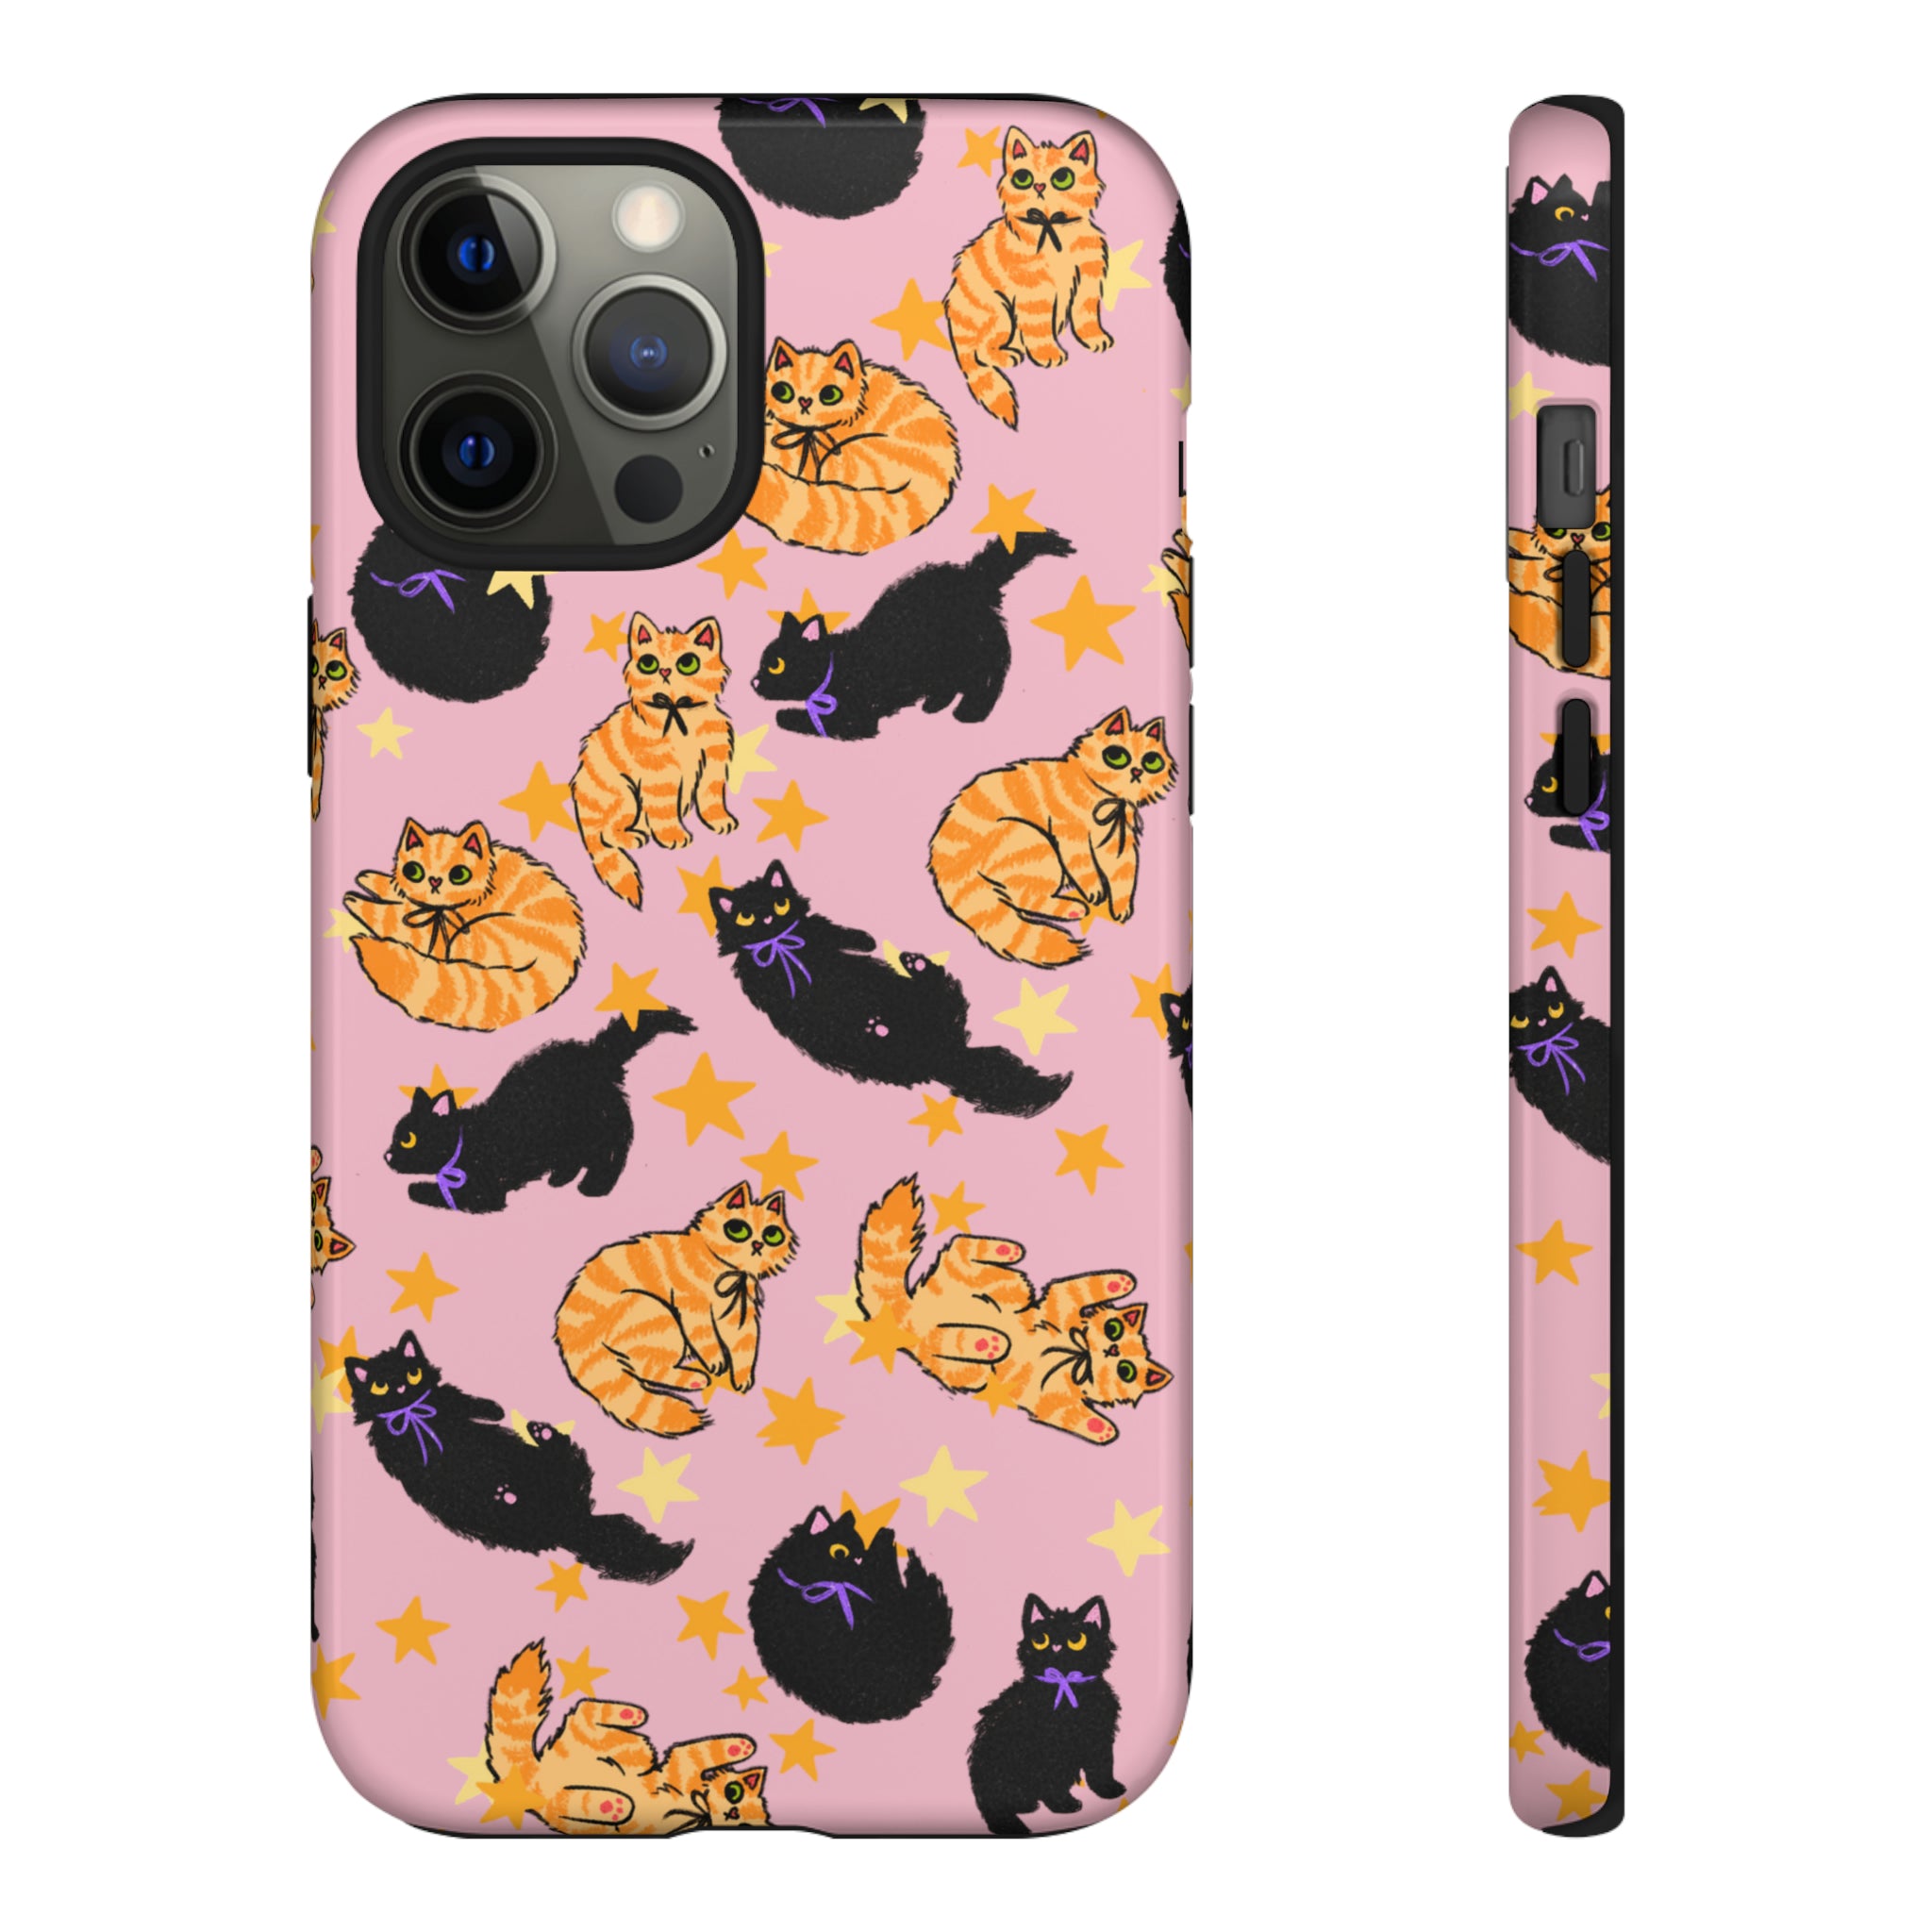 All The Kitties Phone Case